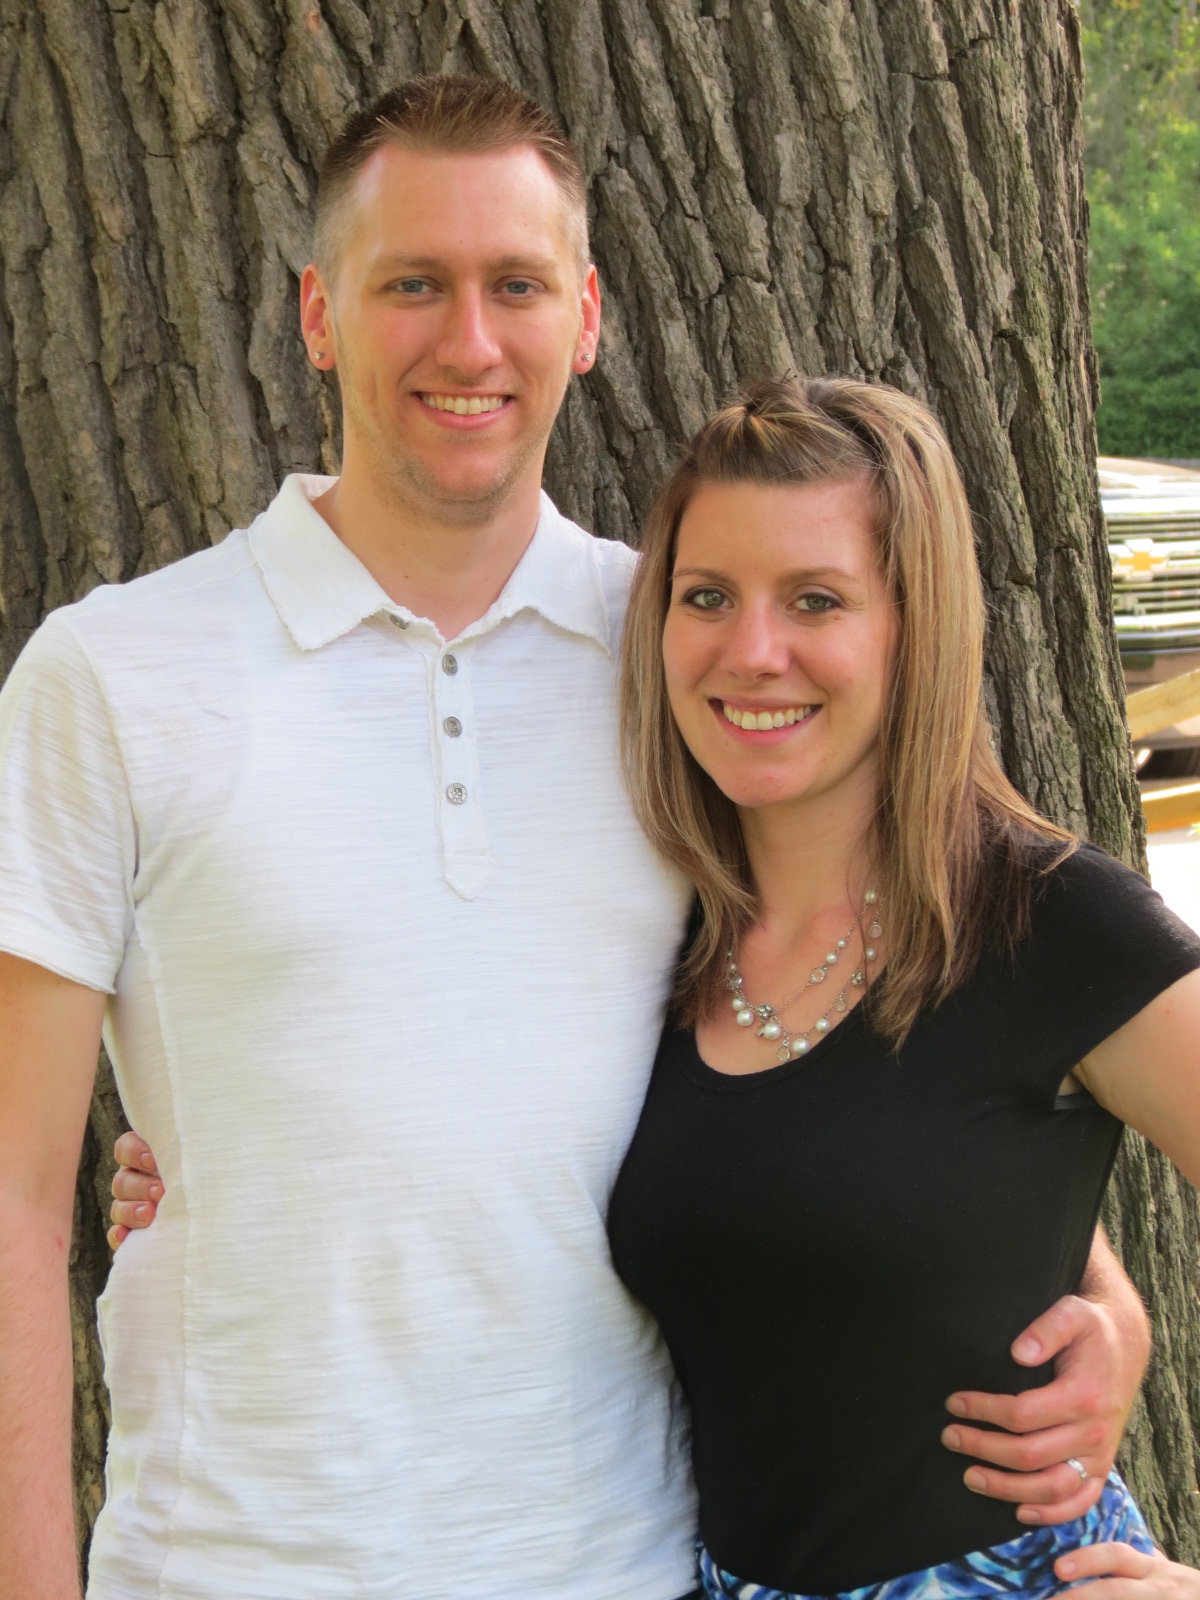 Randy & Leah Stilwell, our niece & husband.  Leah & Randy are expecting their first baby!  